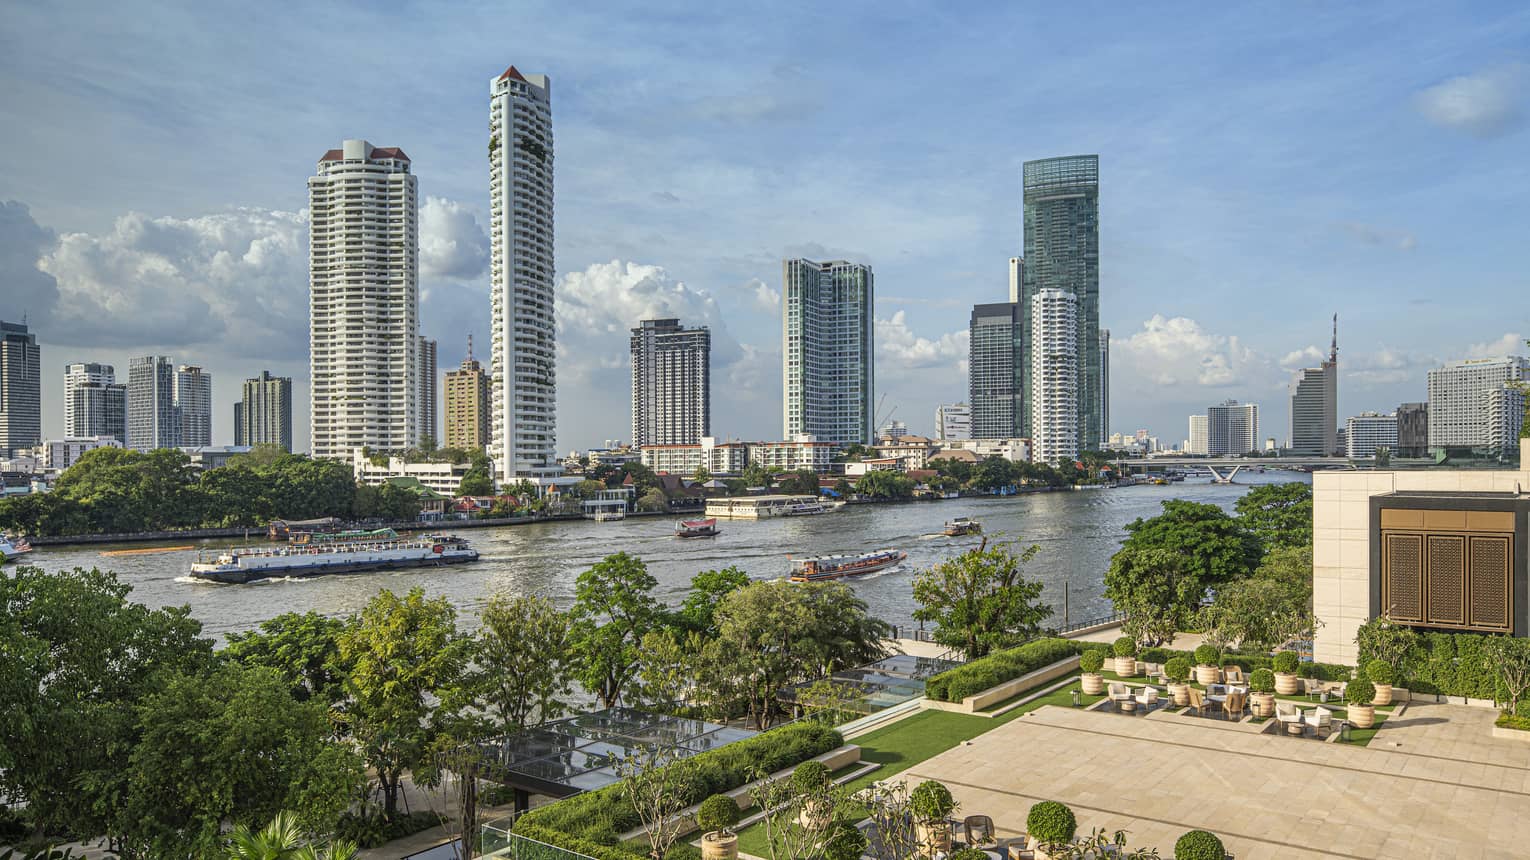 Outdoor terrace with landscaping around edge, view of Chao Phraya River in Bangkok